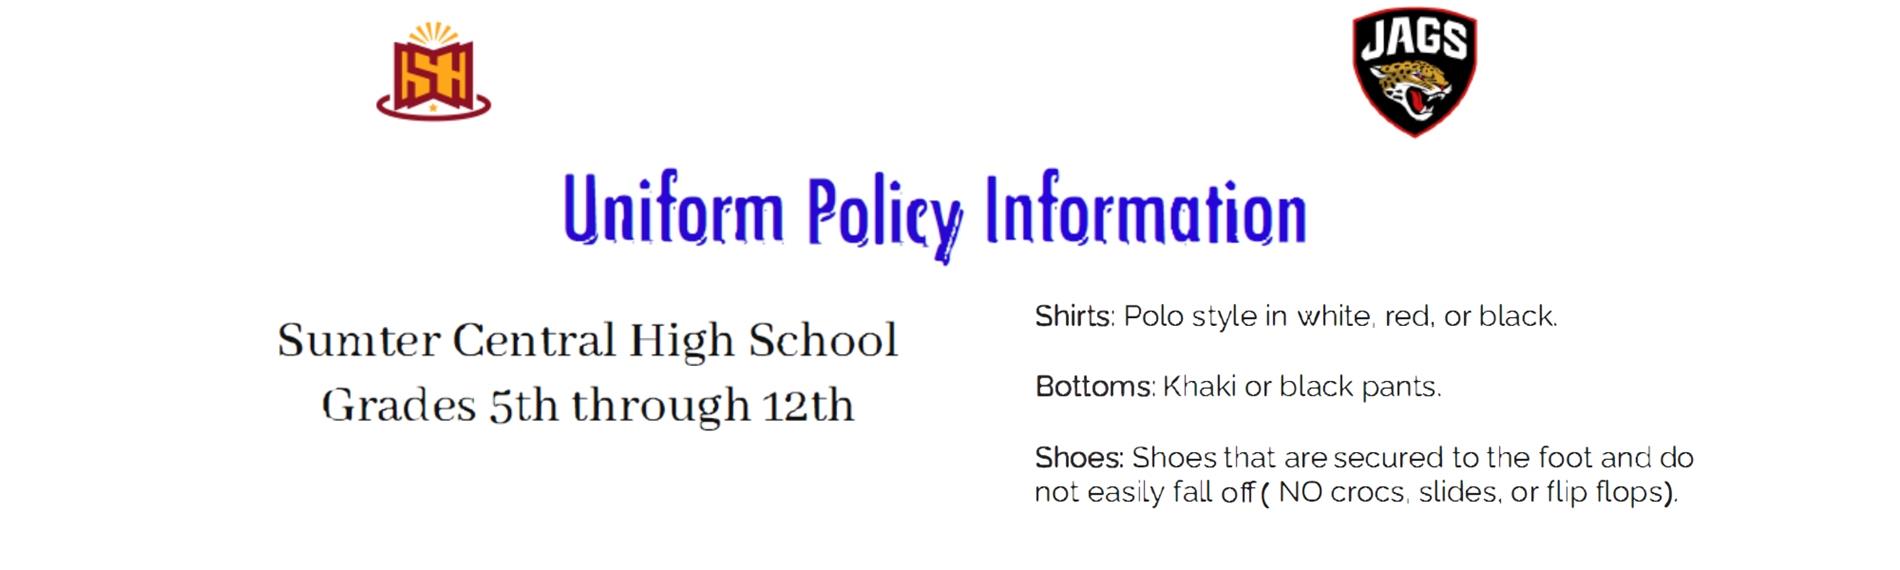 Uniform Policy Information for Sumter Central High School